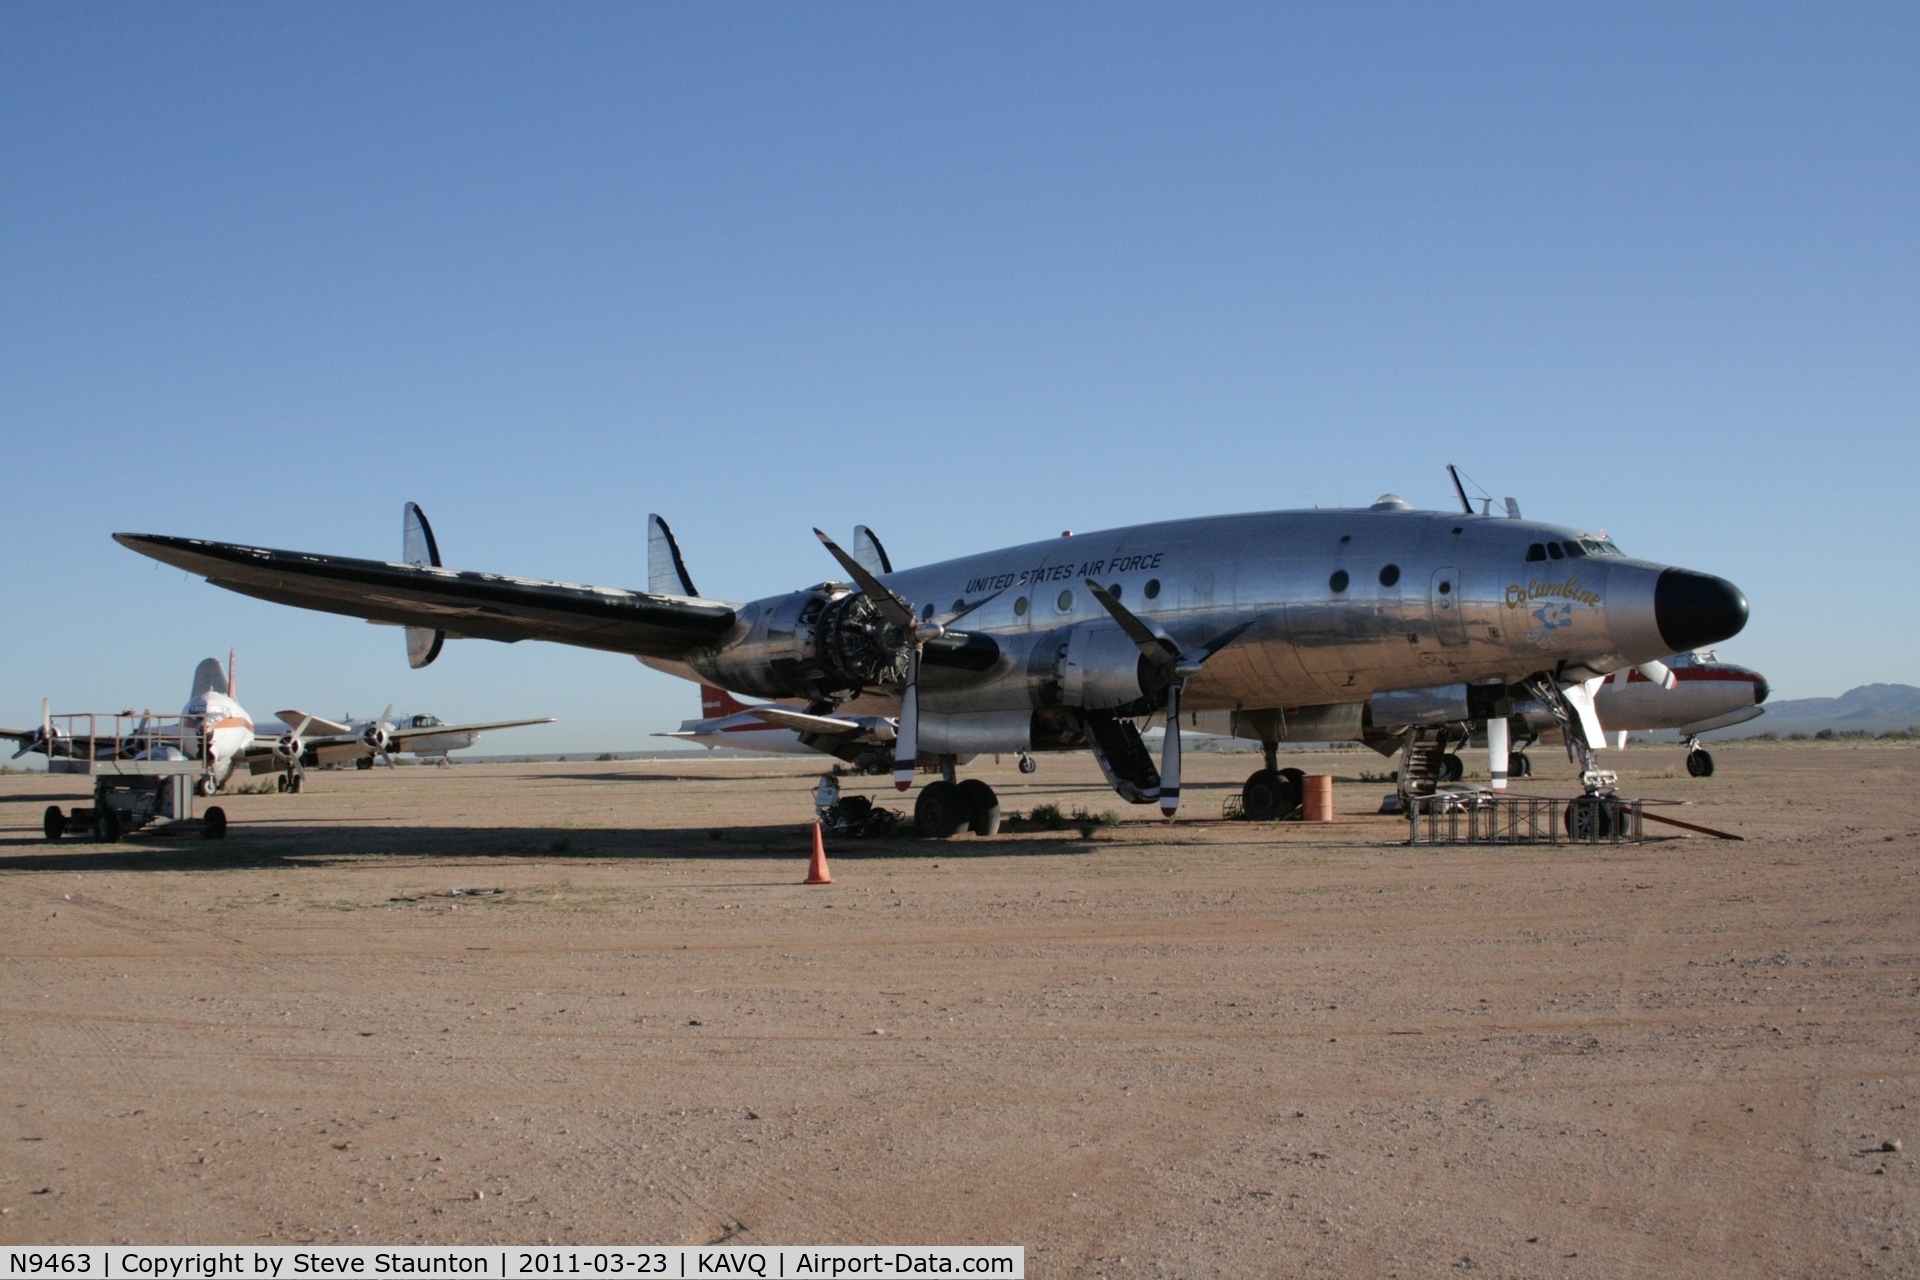 N9463, 1948 Lockheed VC-121B Constellation C/N 749-2602, Taken at Avra Valley Airport, in March 2011 whilst on an Aeroprint Aviation tour